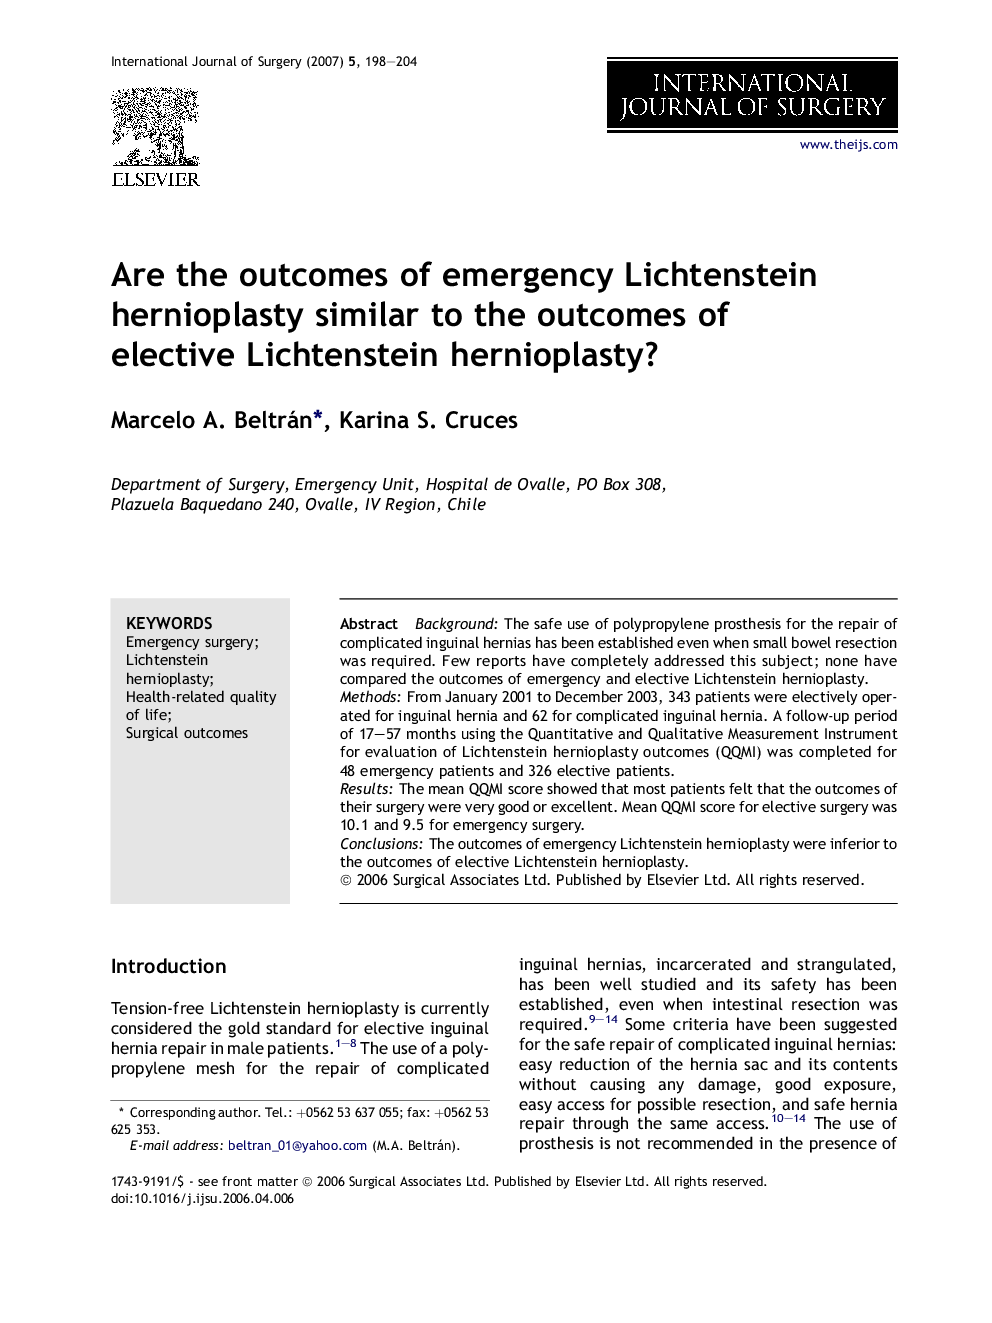 Are the outcomes of emergency Lichtenstein hernioplasty similar to the outcomes of elective Lichtenstein hernioplasty?